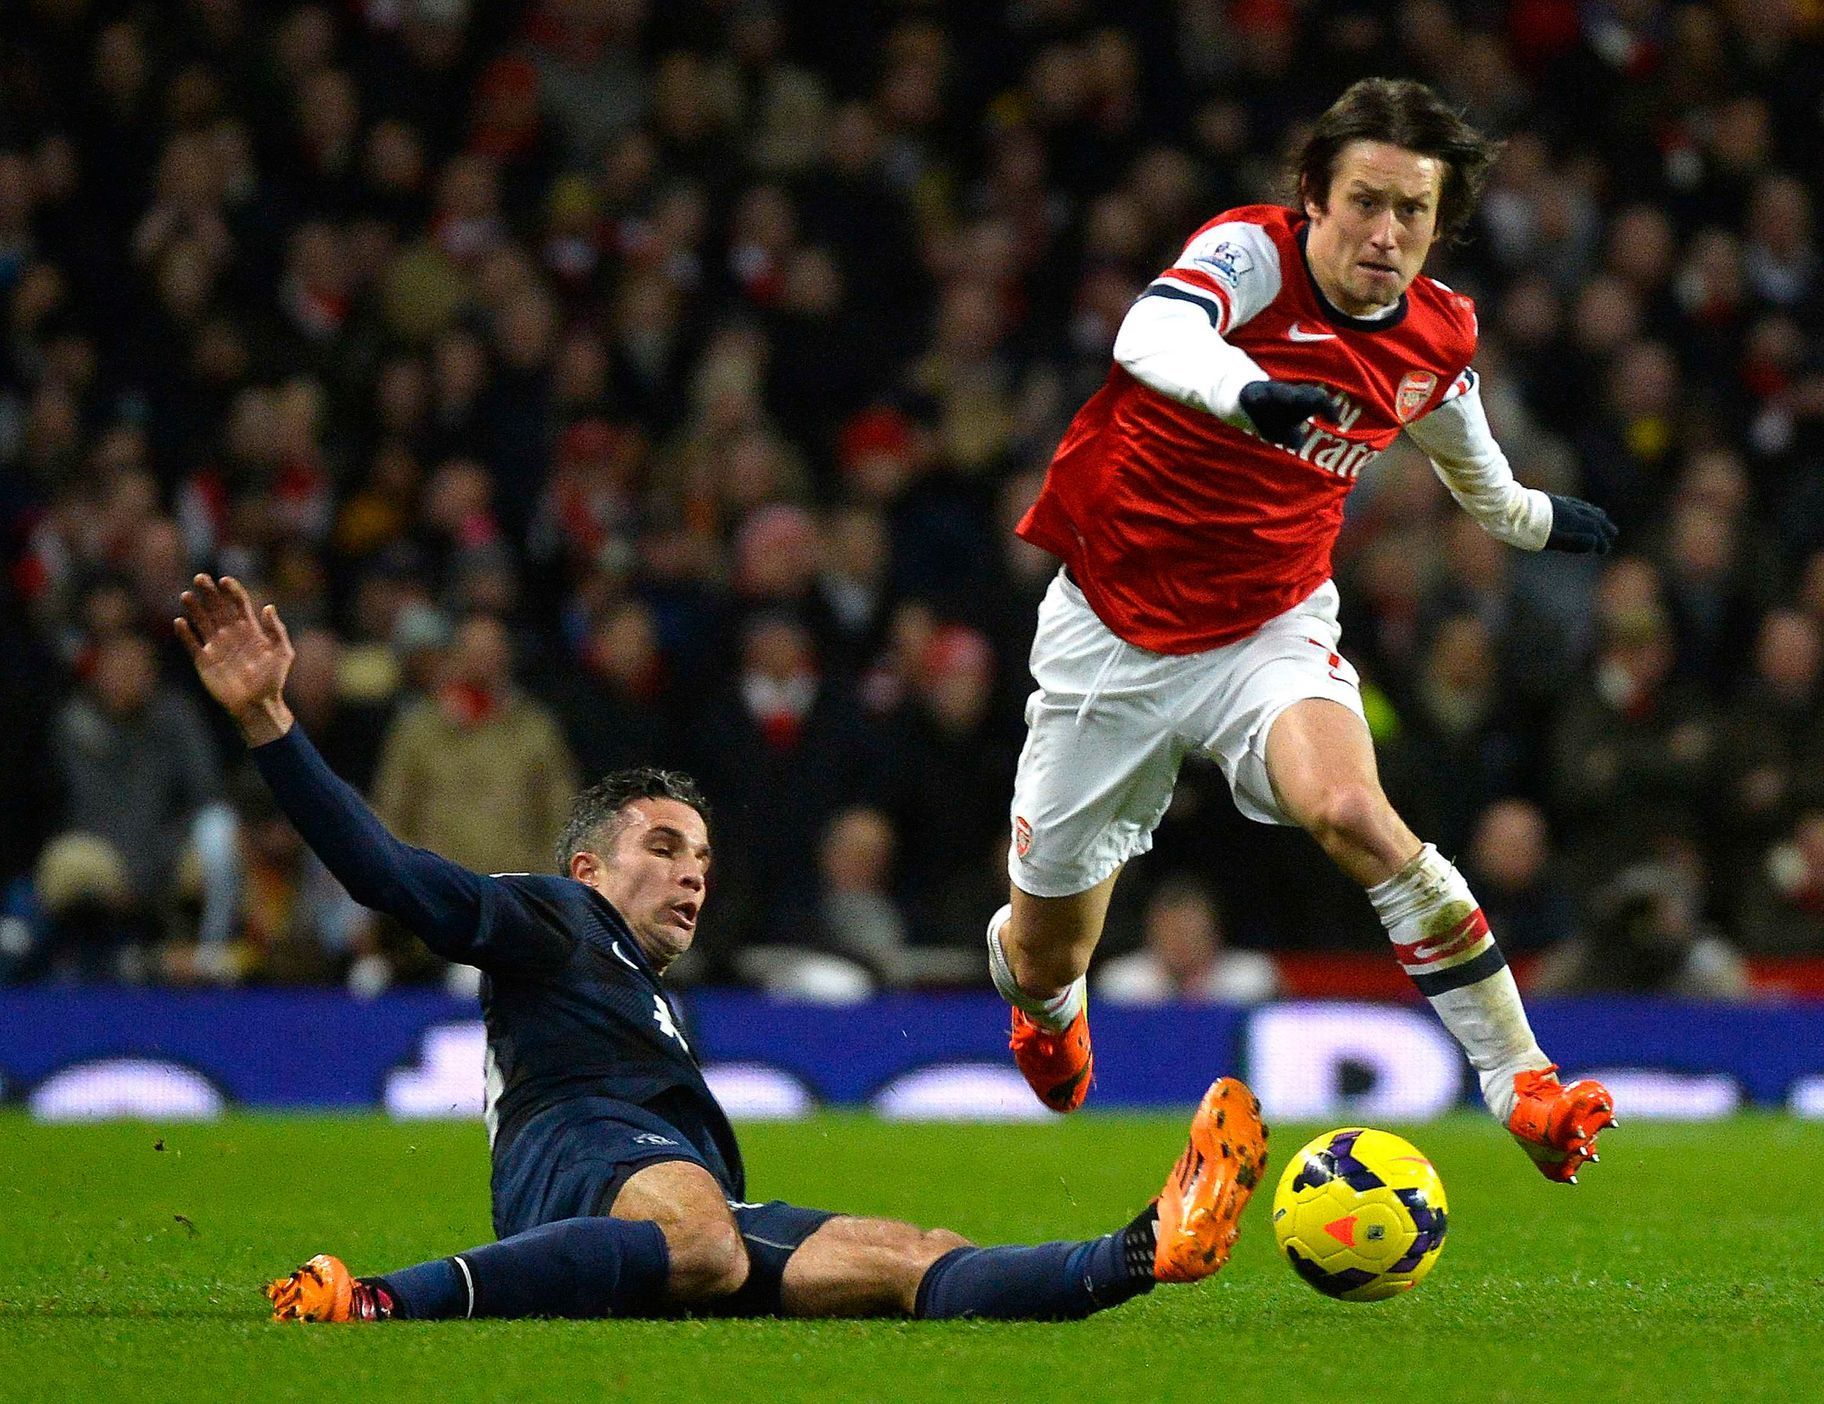 Arsenal's Rosicky challenges Manchester United's Van Persie during their English Premier League soccer match at the Emirates stadium in London